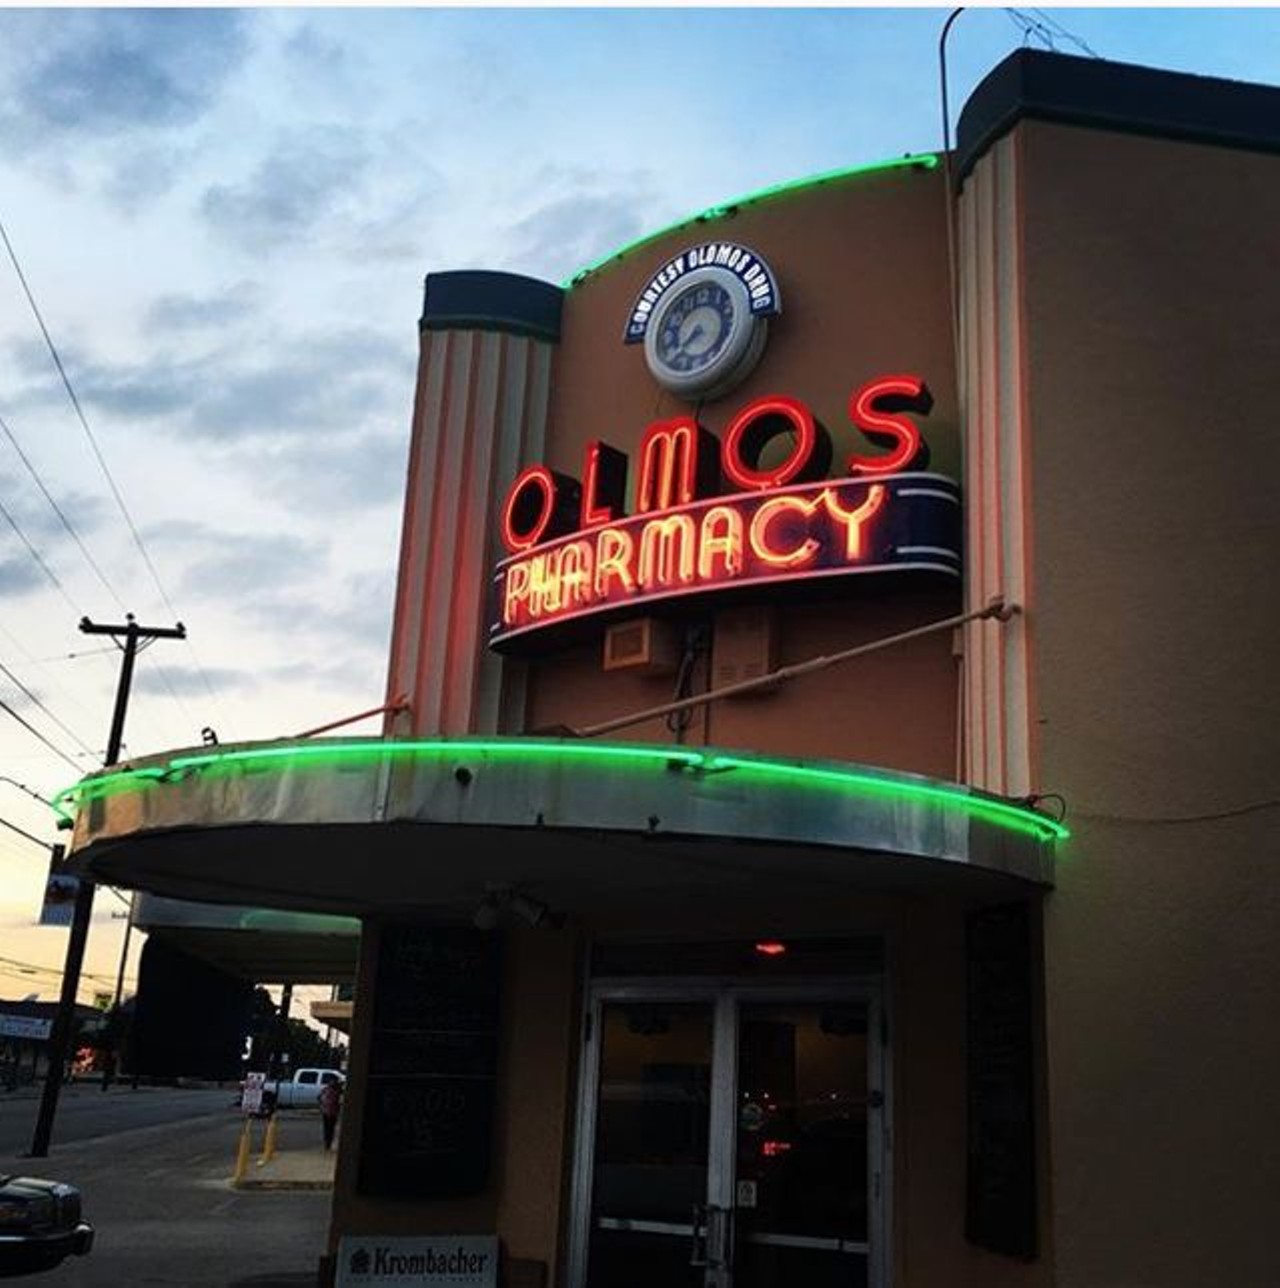 Olmos Pharmacy
3902 McCullough Ave., (210) 822-1188
If you&#146;re looking for a quick fix to an empty stomach, Olmos Pharmacy has what you need. This classic American eatery serves up diner favorites with a side of poetry and live music. 
Photo via Instagram,  j.p.mcd